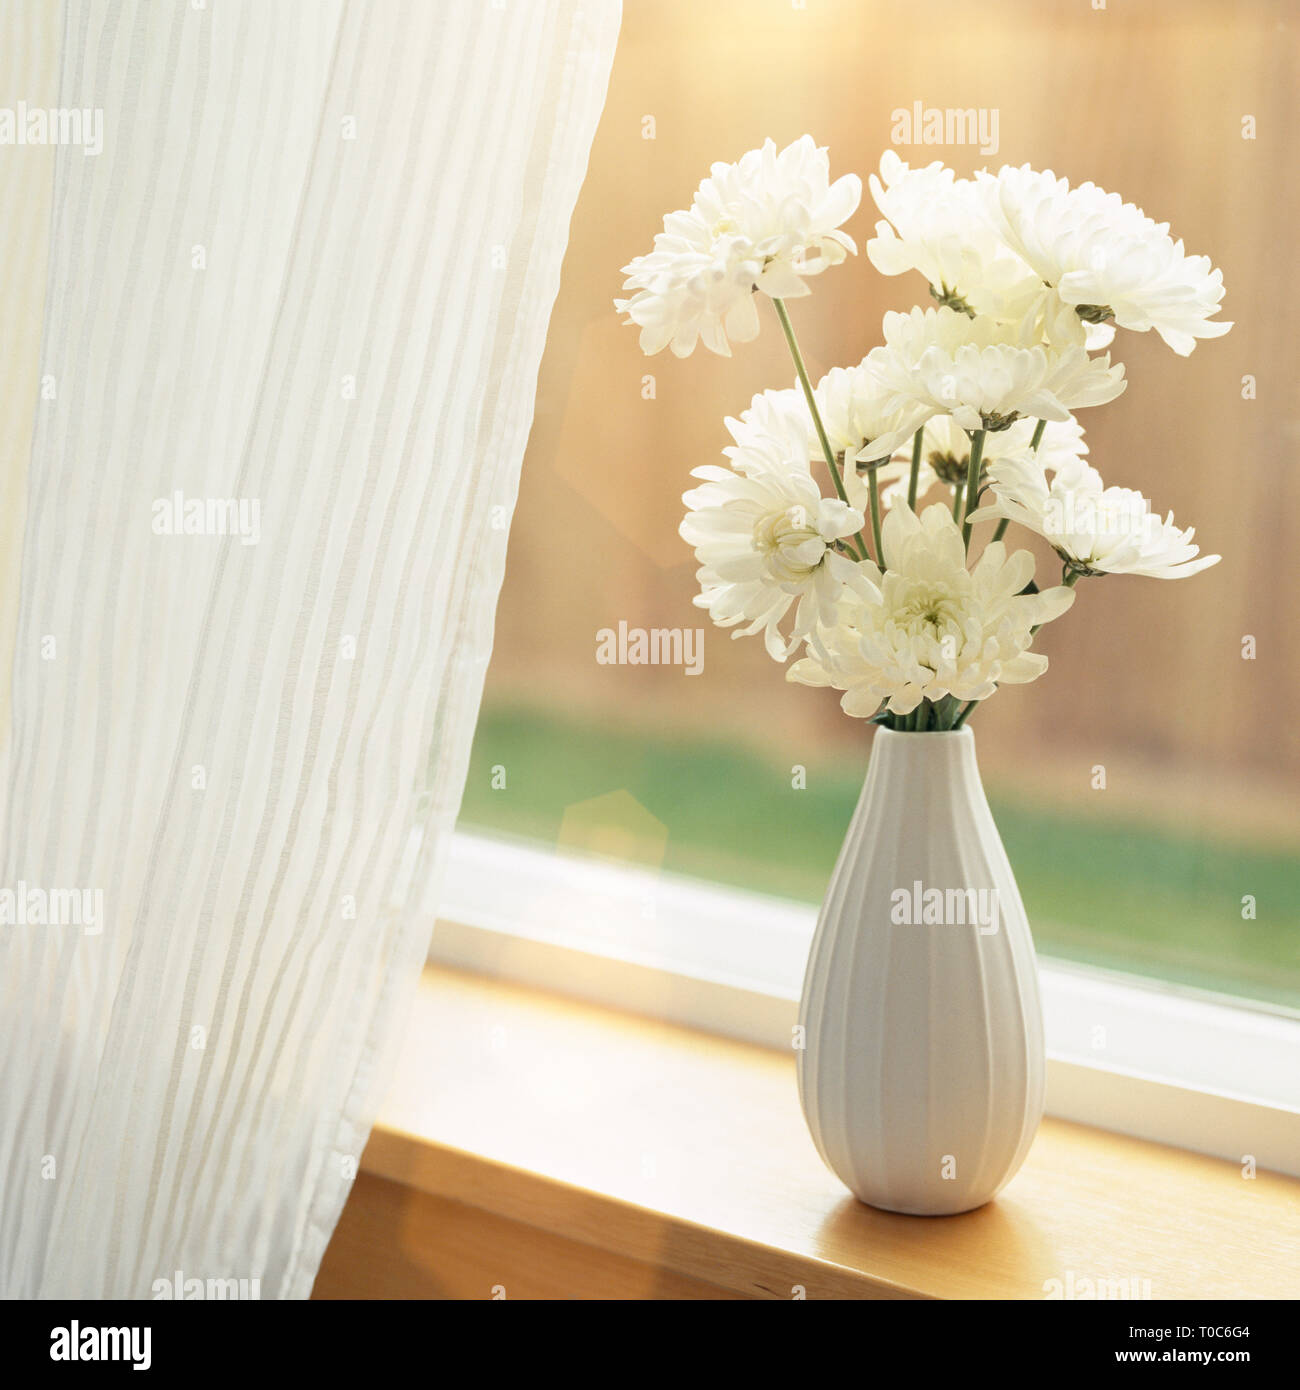 Fresh flowers in vase on windowsill with sheer fabric curtains window coverings. Simple, natural, contemporary home interior decor background elements Stock Photo